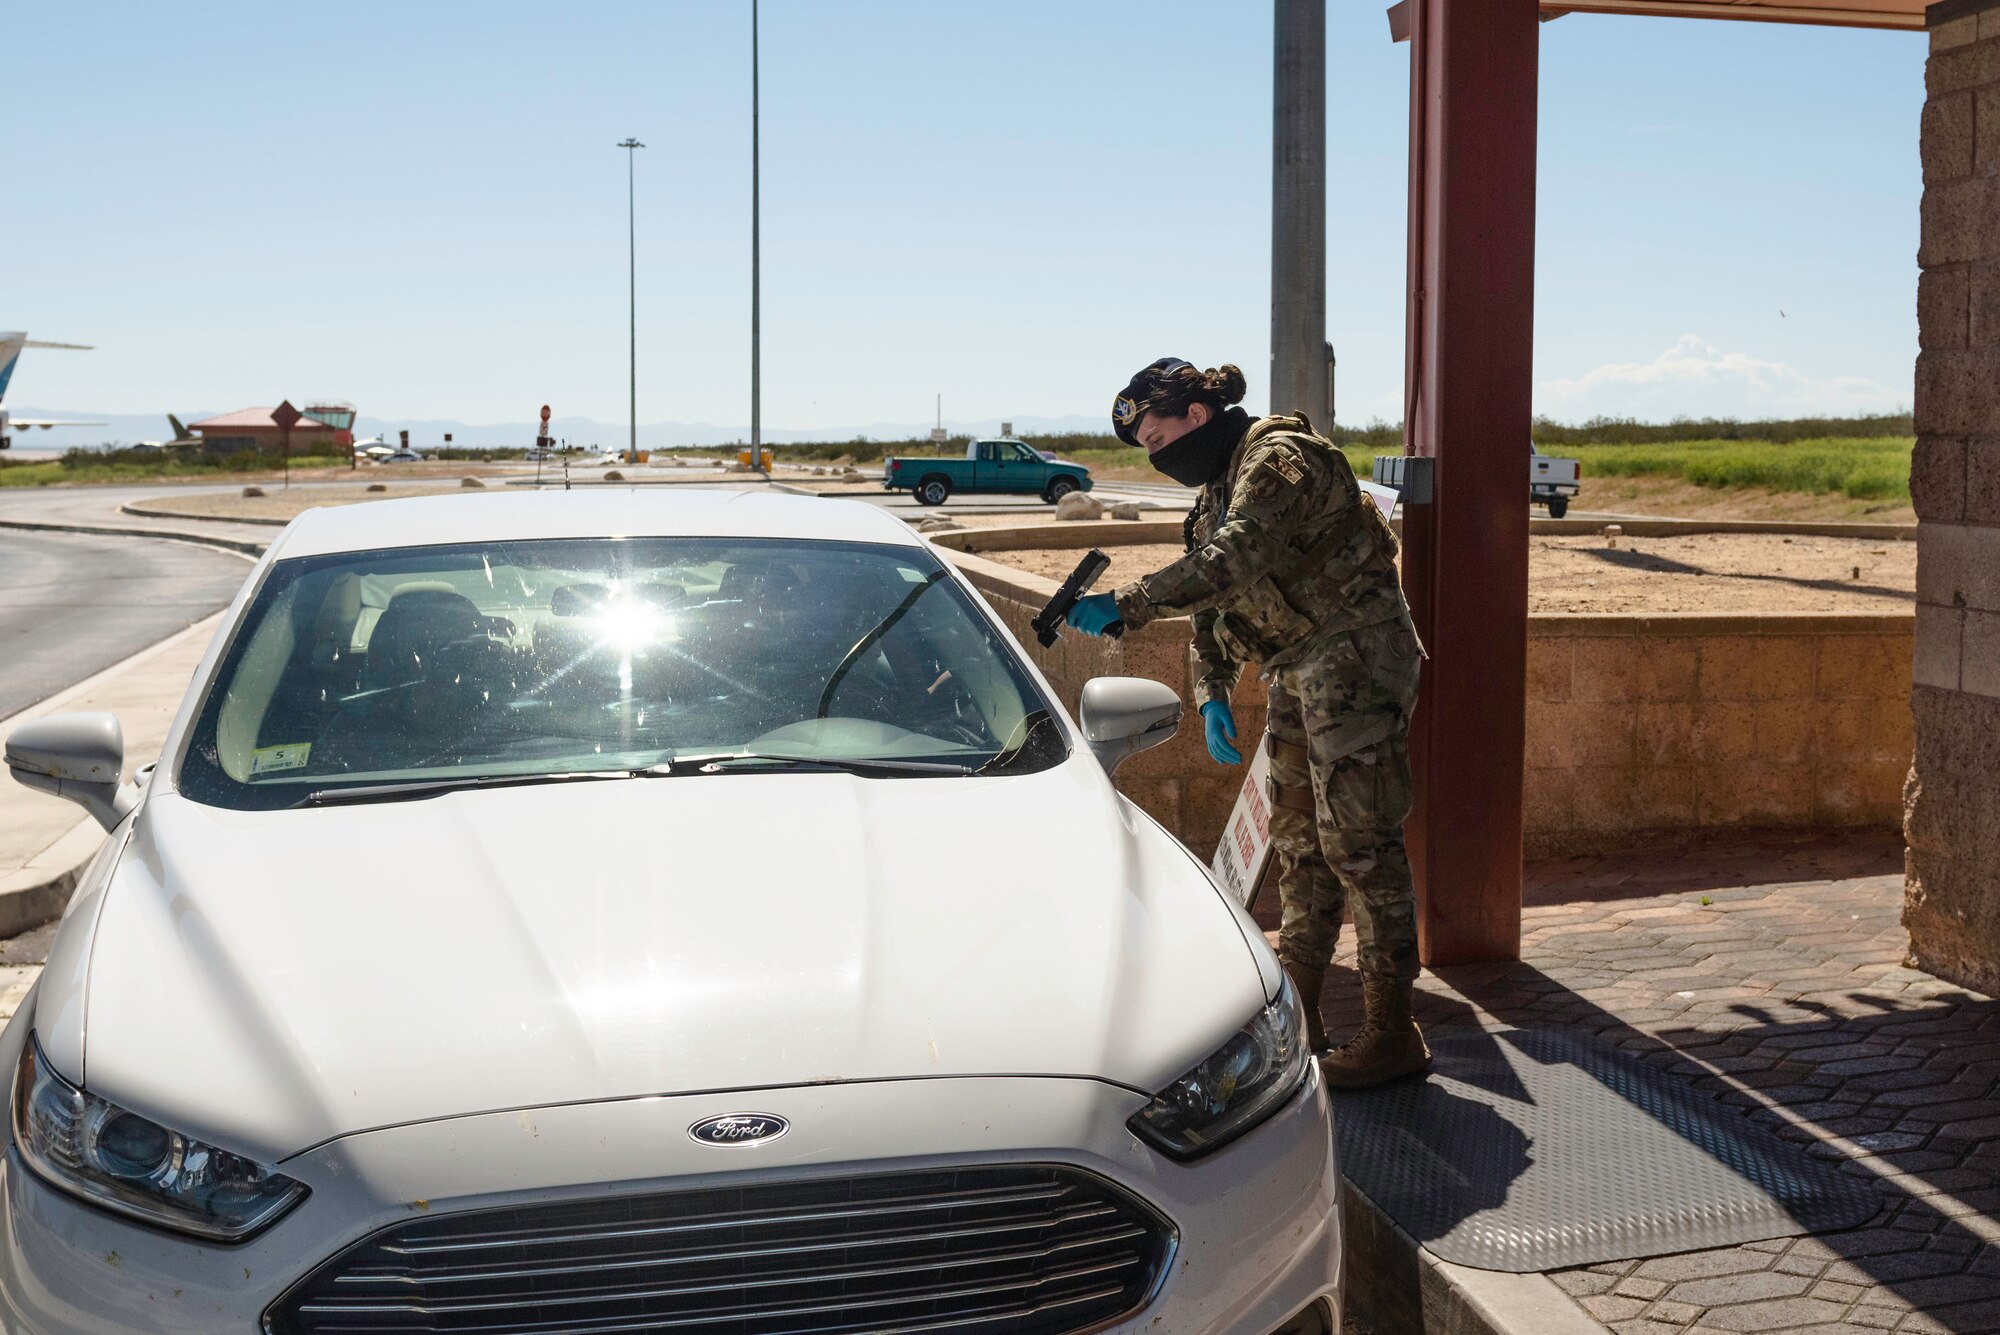 Airman 1st Class Jade Groelinger, 412th Security Forces Squadron, 412th Test Wing at Edwards Air Force Base, California, scans an identification card at the West gate at Edwards AFB, April 16. (Photo by Richard Gonzales).